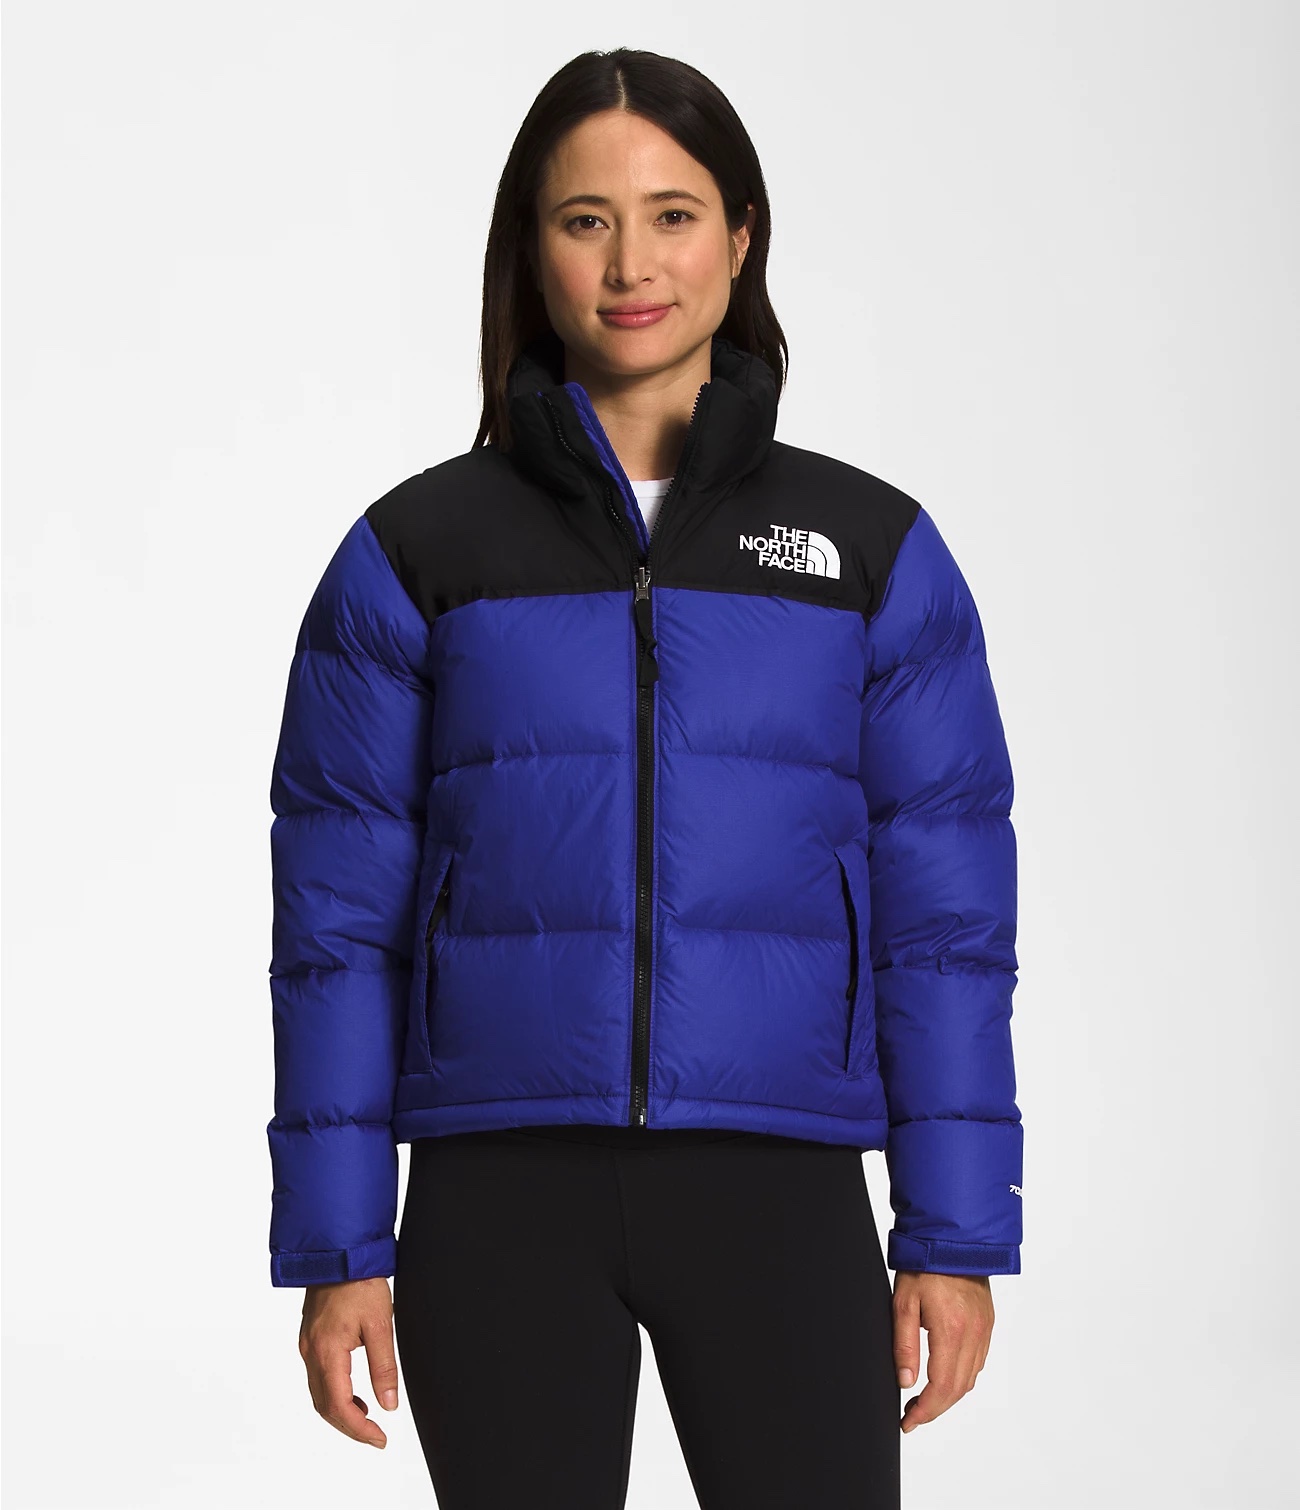 The North Face 1996 Retro Nuptse Jacket for extreme cold